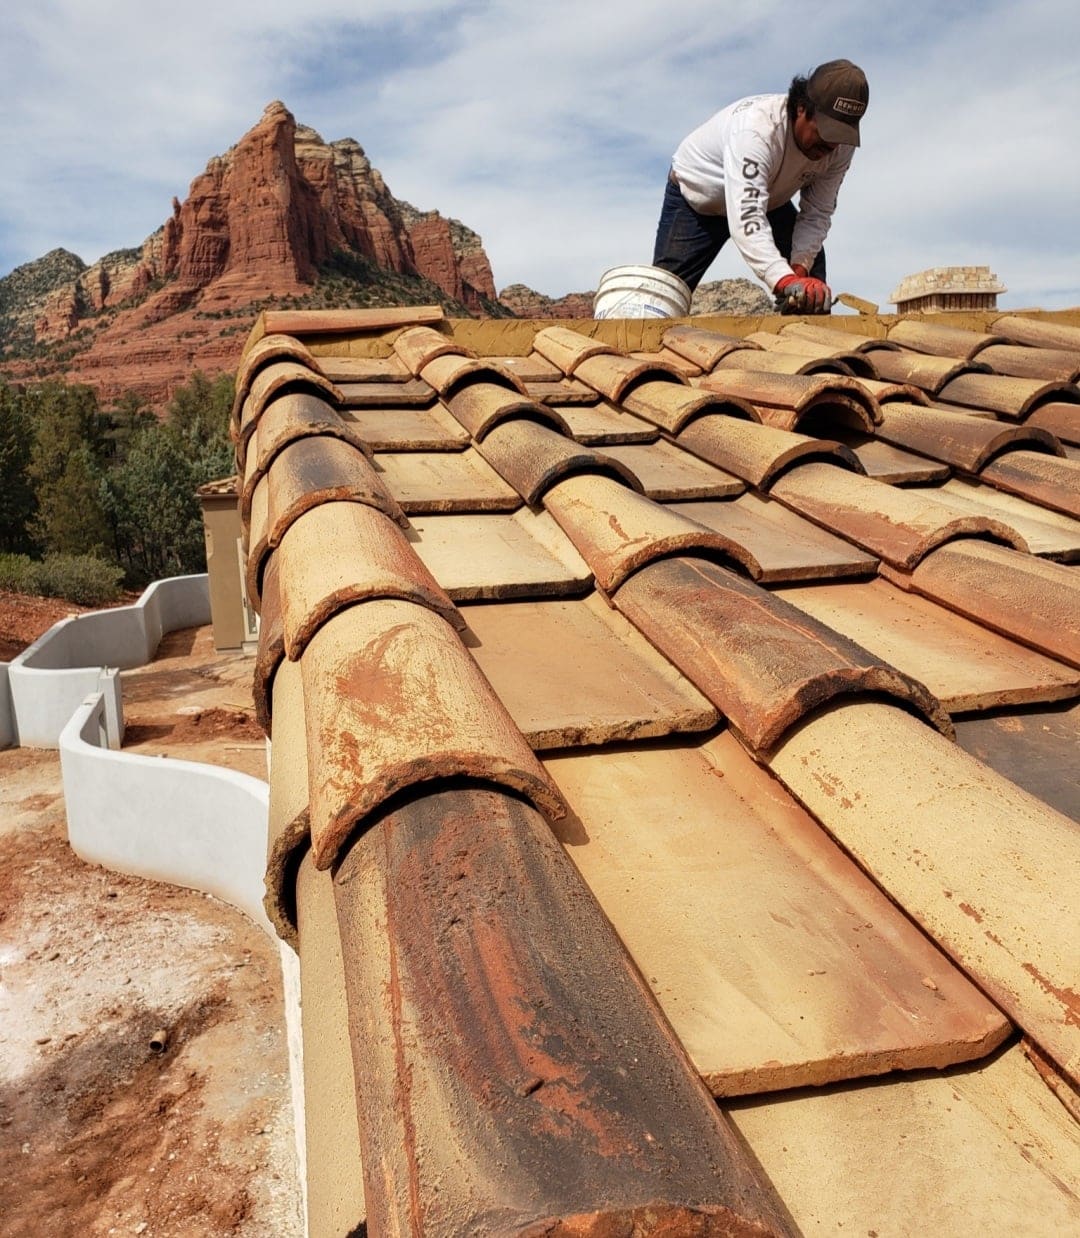 Worker on top of a Mesa home aligning new roof tiles.